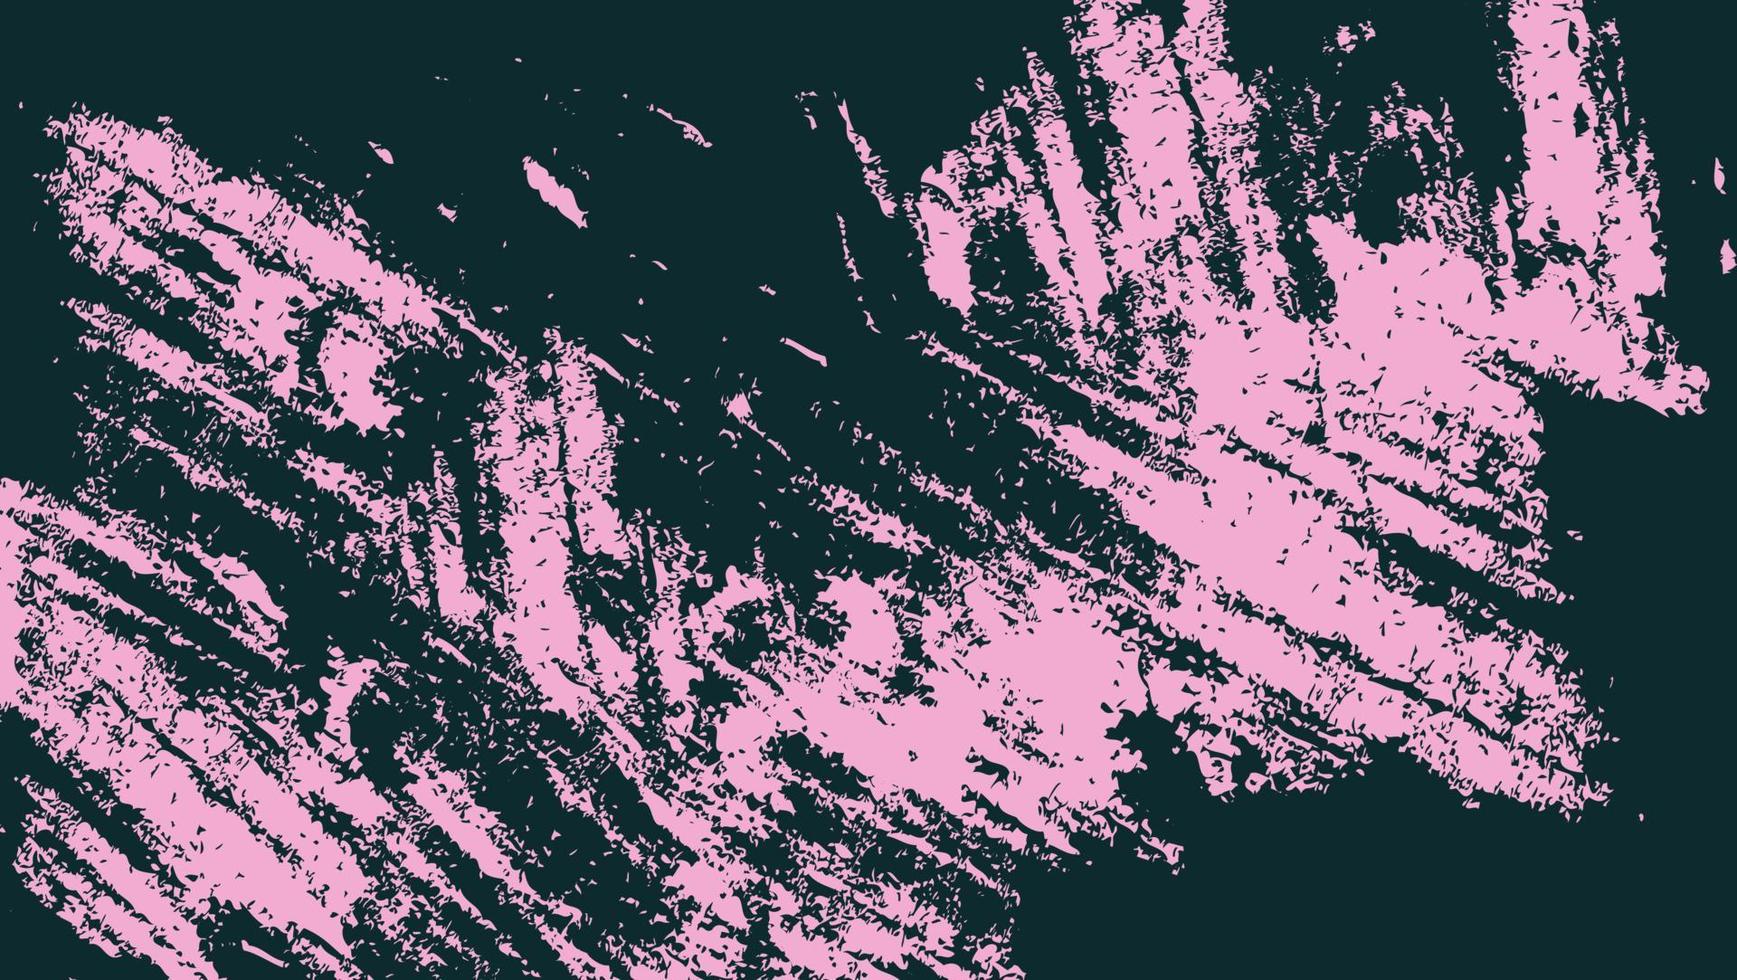 Abstract Pink Grunge Texture In Black Design Background vector